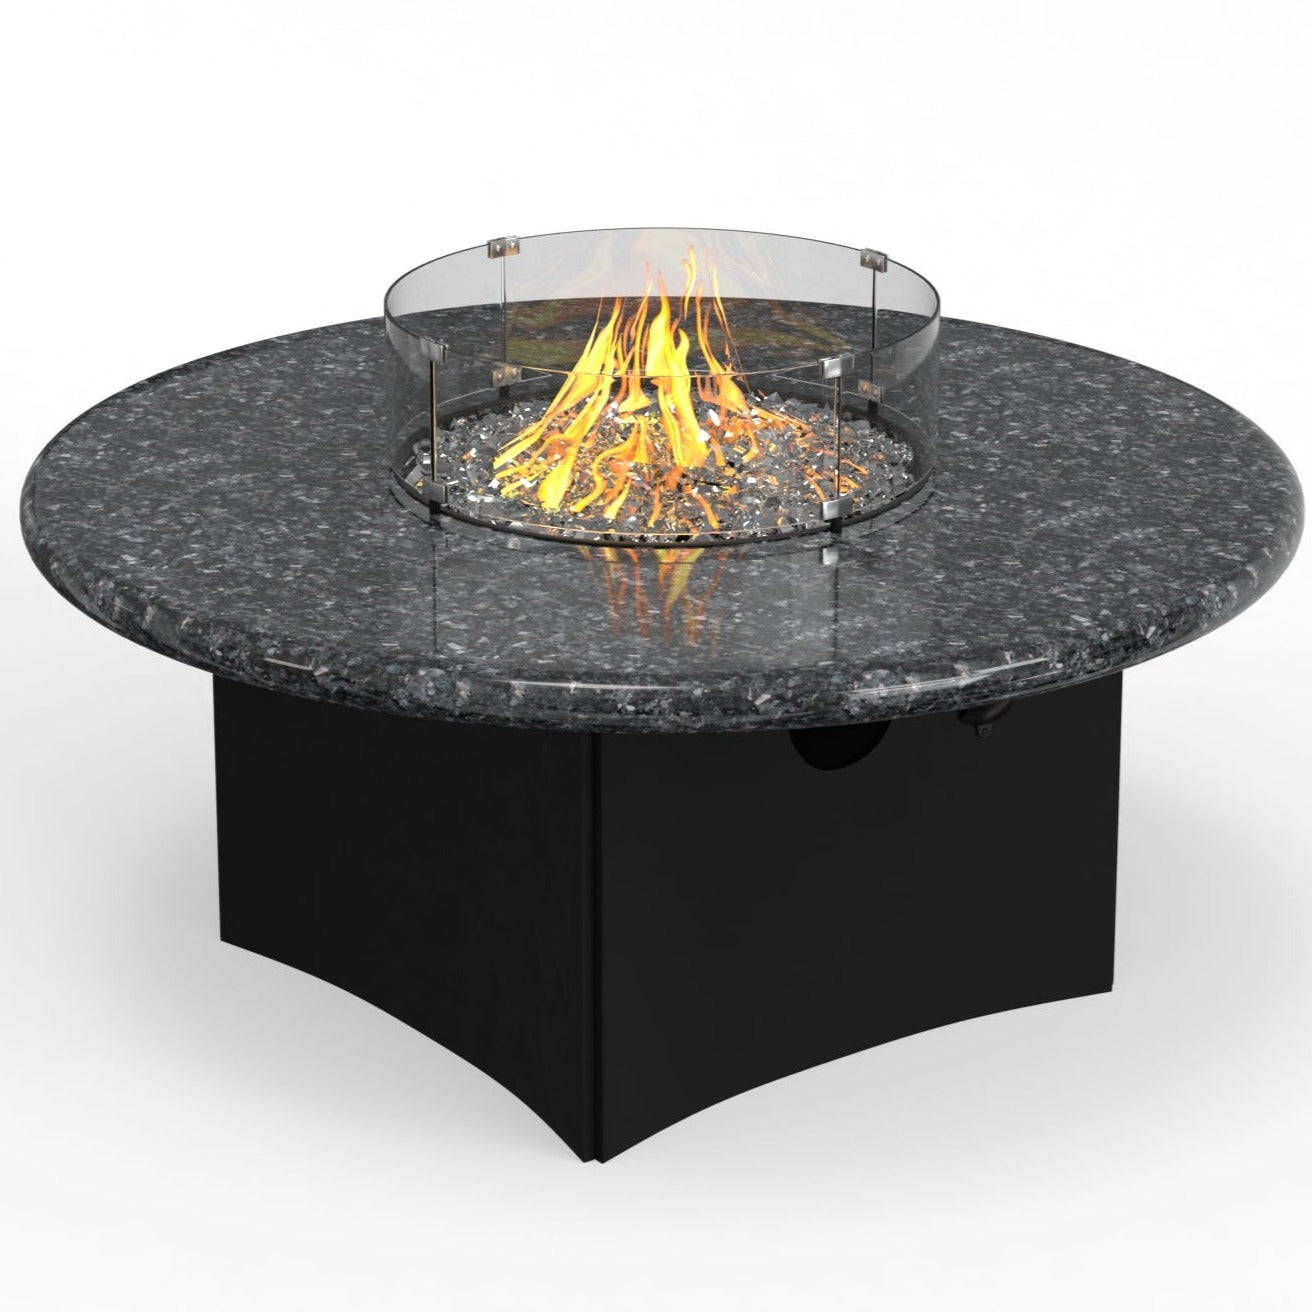 Oriflamme Gas Fire Pit Table Blue Pearl Granite